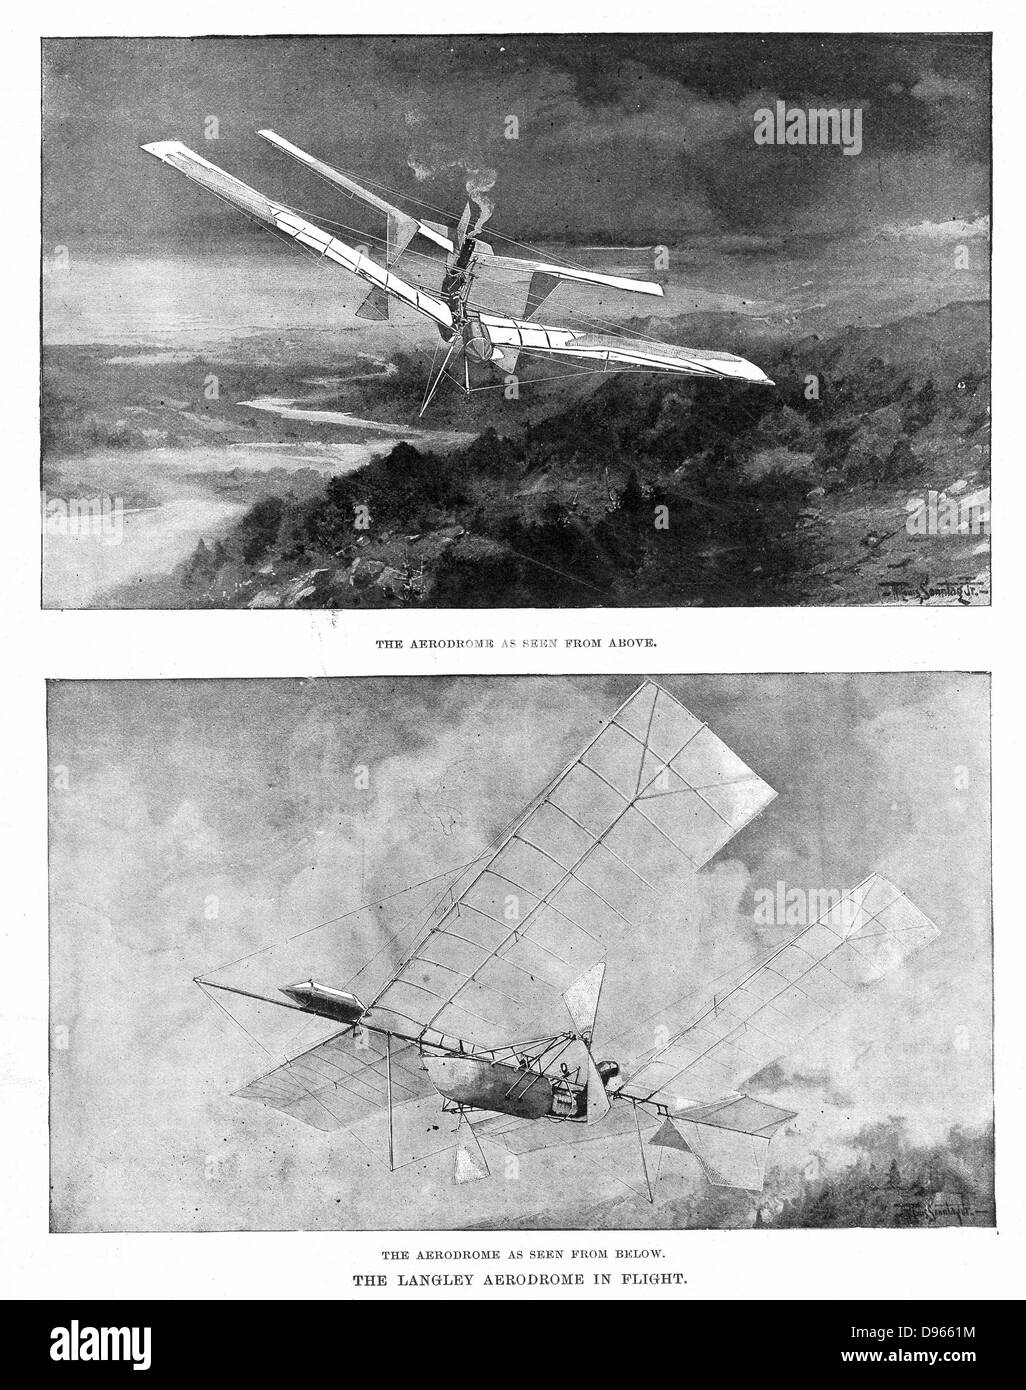 Samuel Pierpont Langley (1834-1906), American astronomer and aeronautical pioneer. Langley's steam-powered model plane 'Aerodrome' viewed from above and below. In 1896 Aerodrome 5 flew 3/4 mile. From 'Scientific American', November 1902 Stock Photo